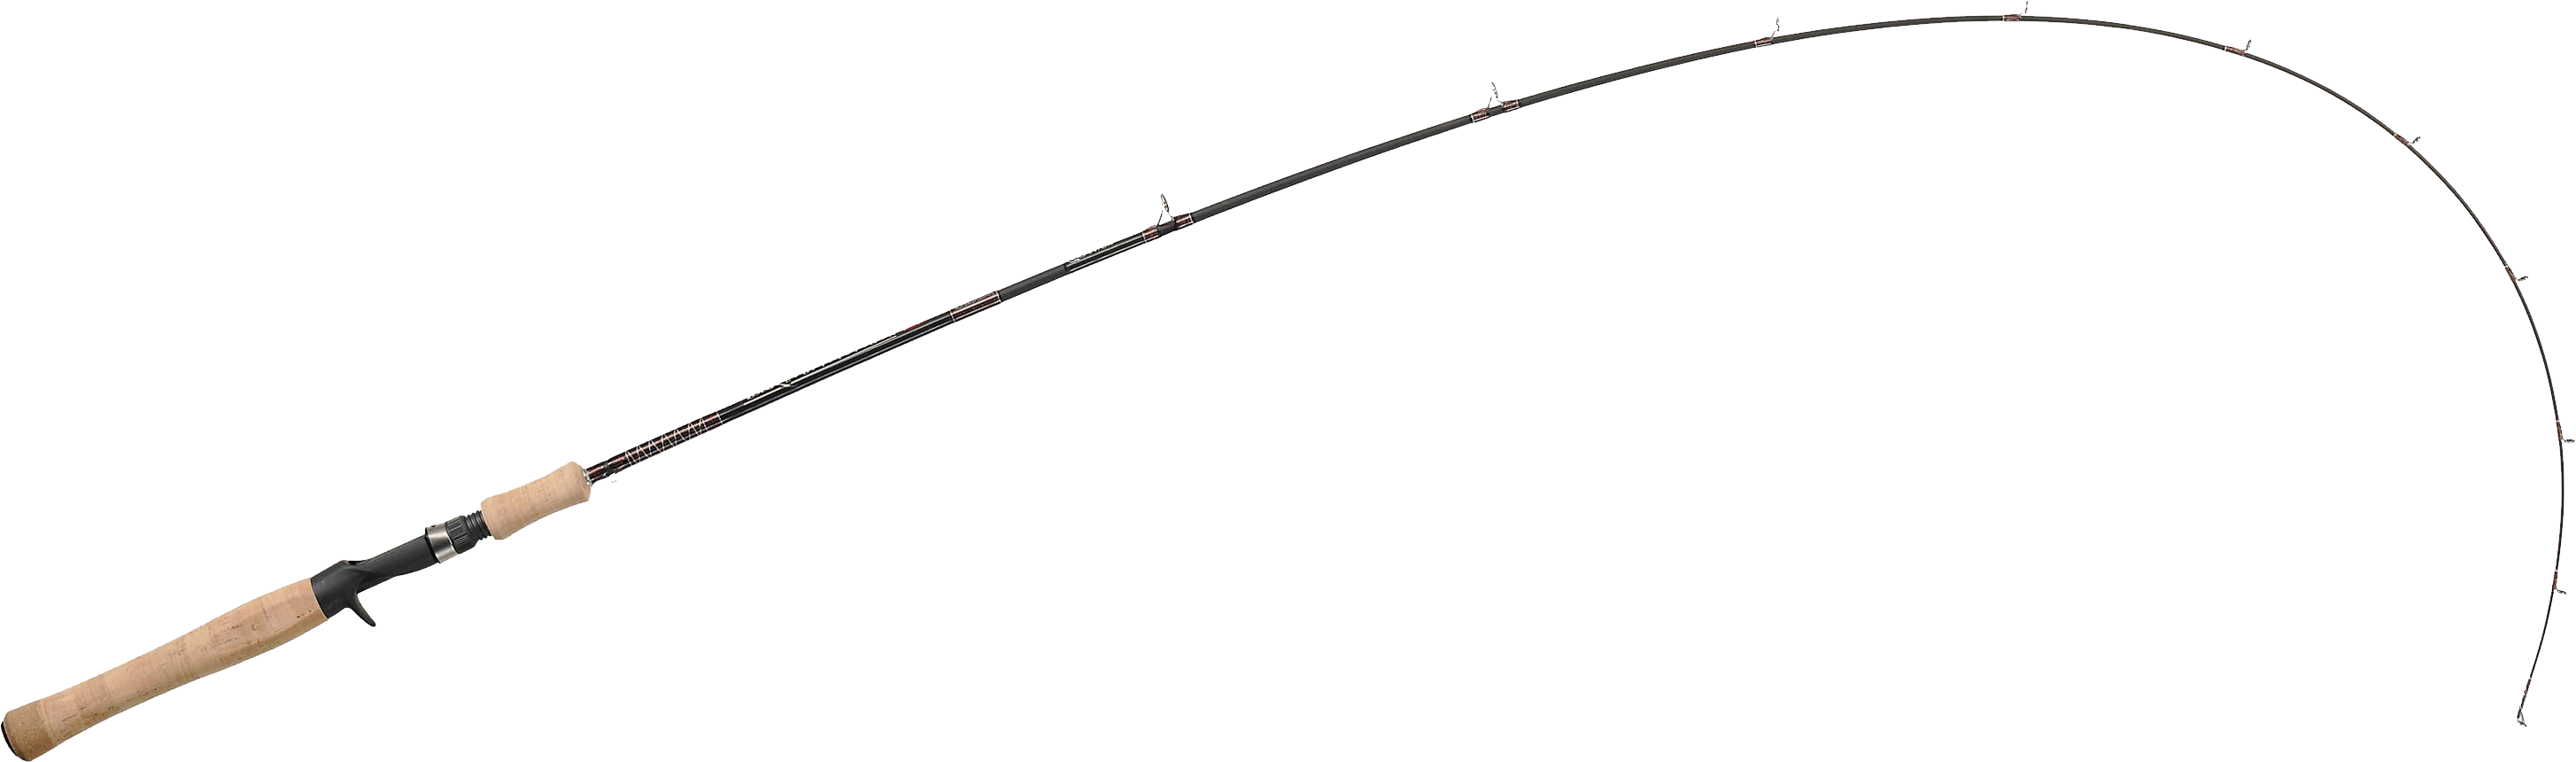 Single Fishing Pole PNG Clipart Background